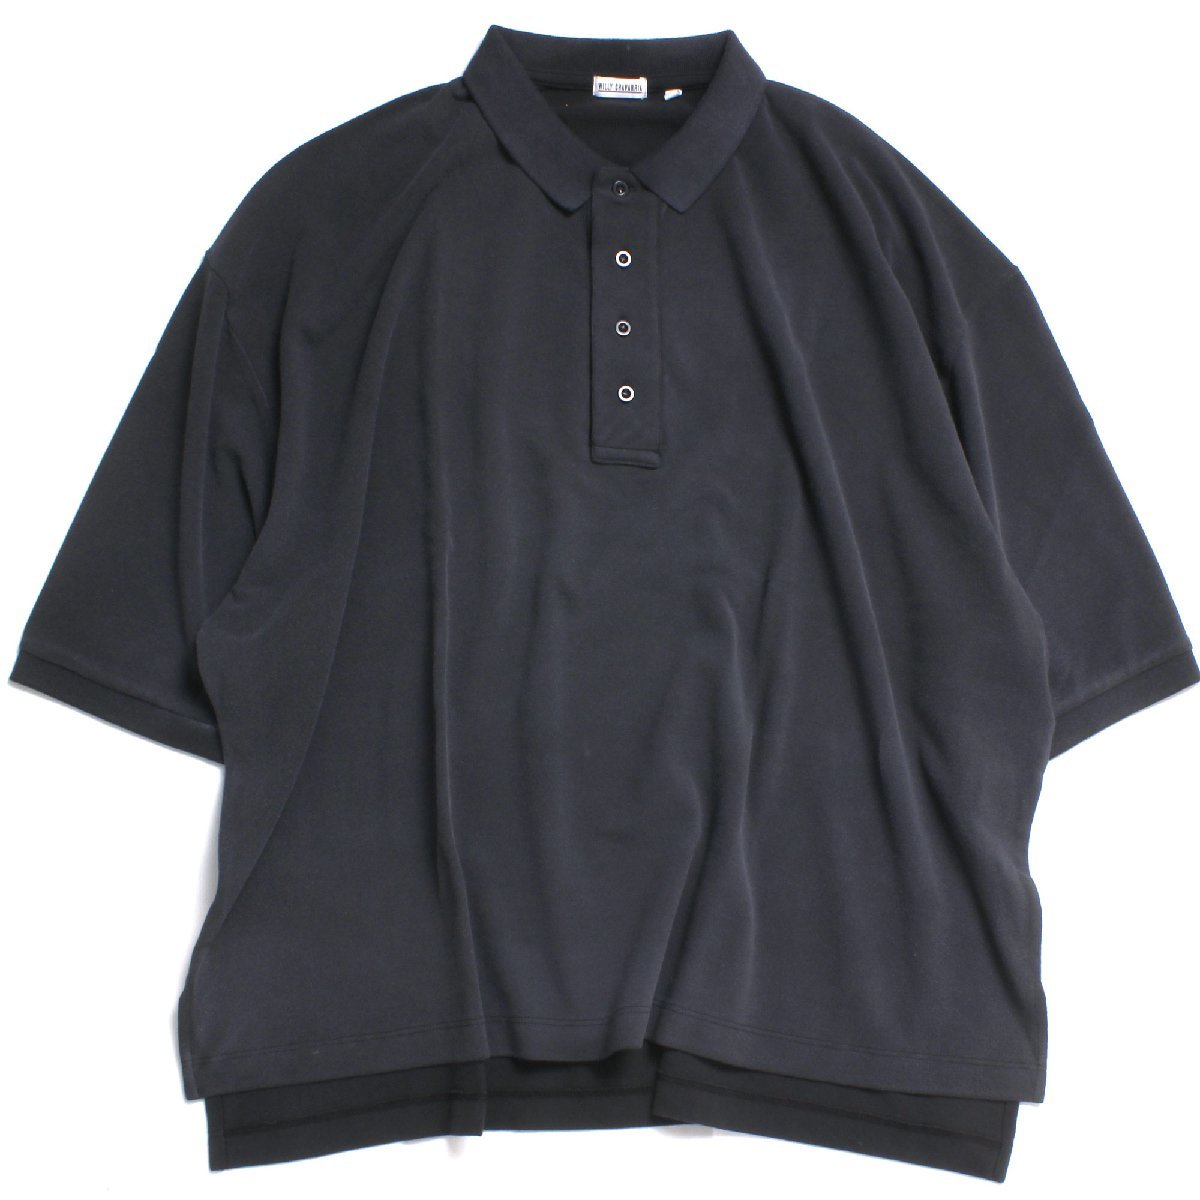 WILLY CHAVARRIA WISM 別注 CHOLO POLO ポロシャツ 定価19,800円 sizeM ブラック ウィリーチャバリア